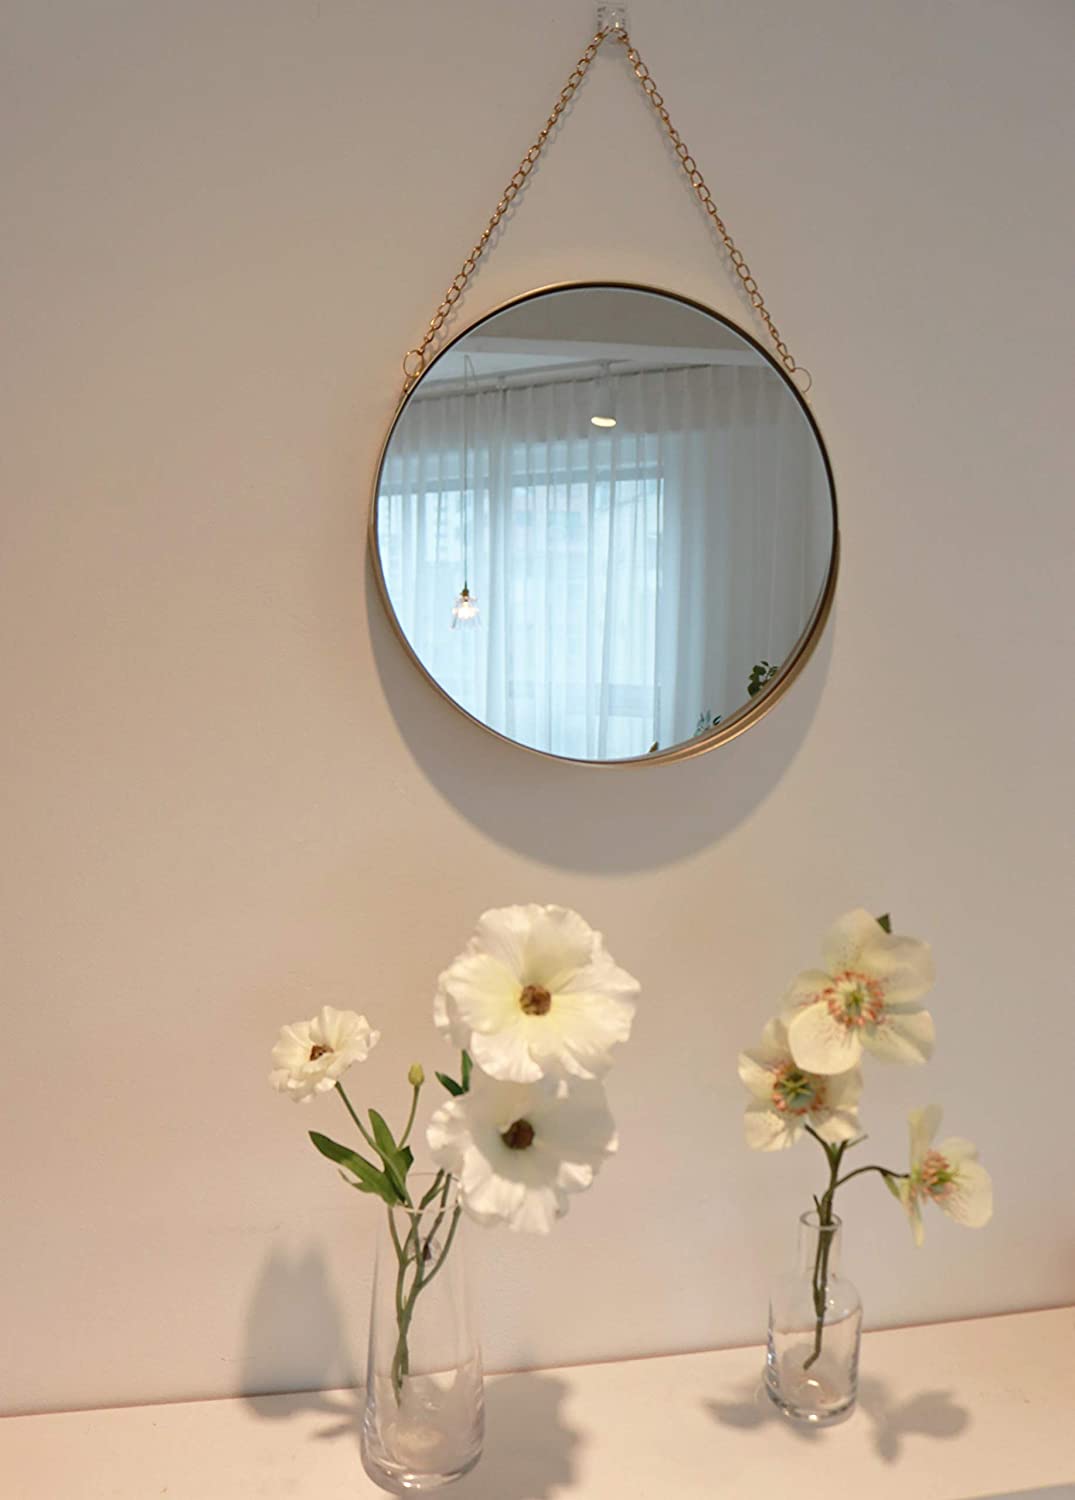 Decorative Hanging Wall Mirror – Small Vintage Mirror for Wall - 10 ...